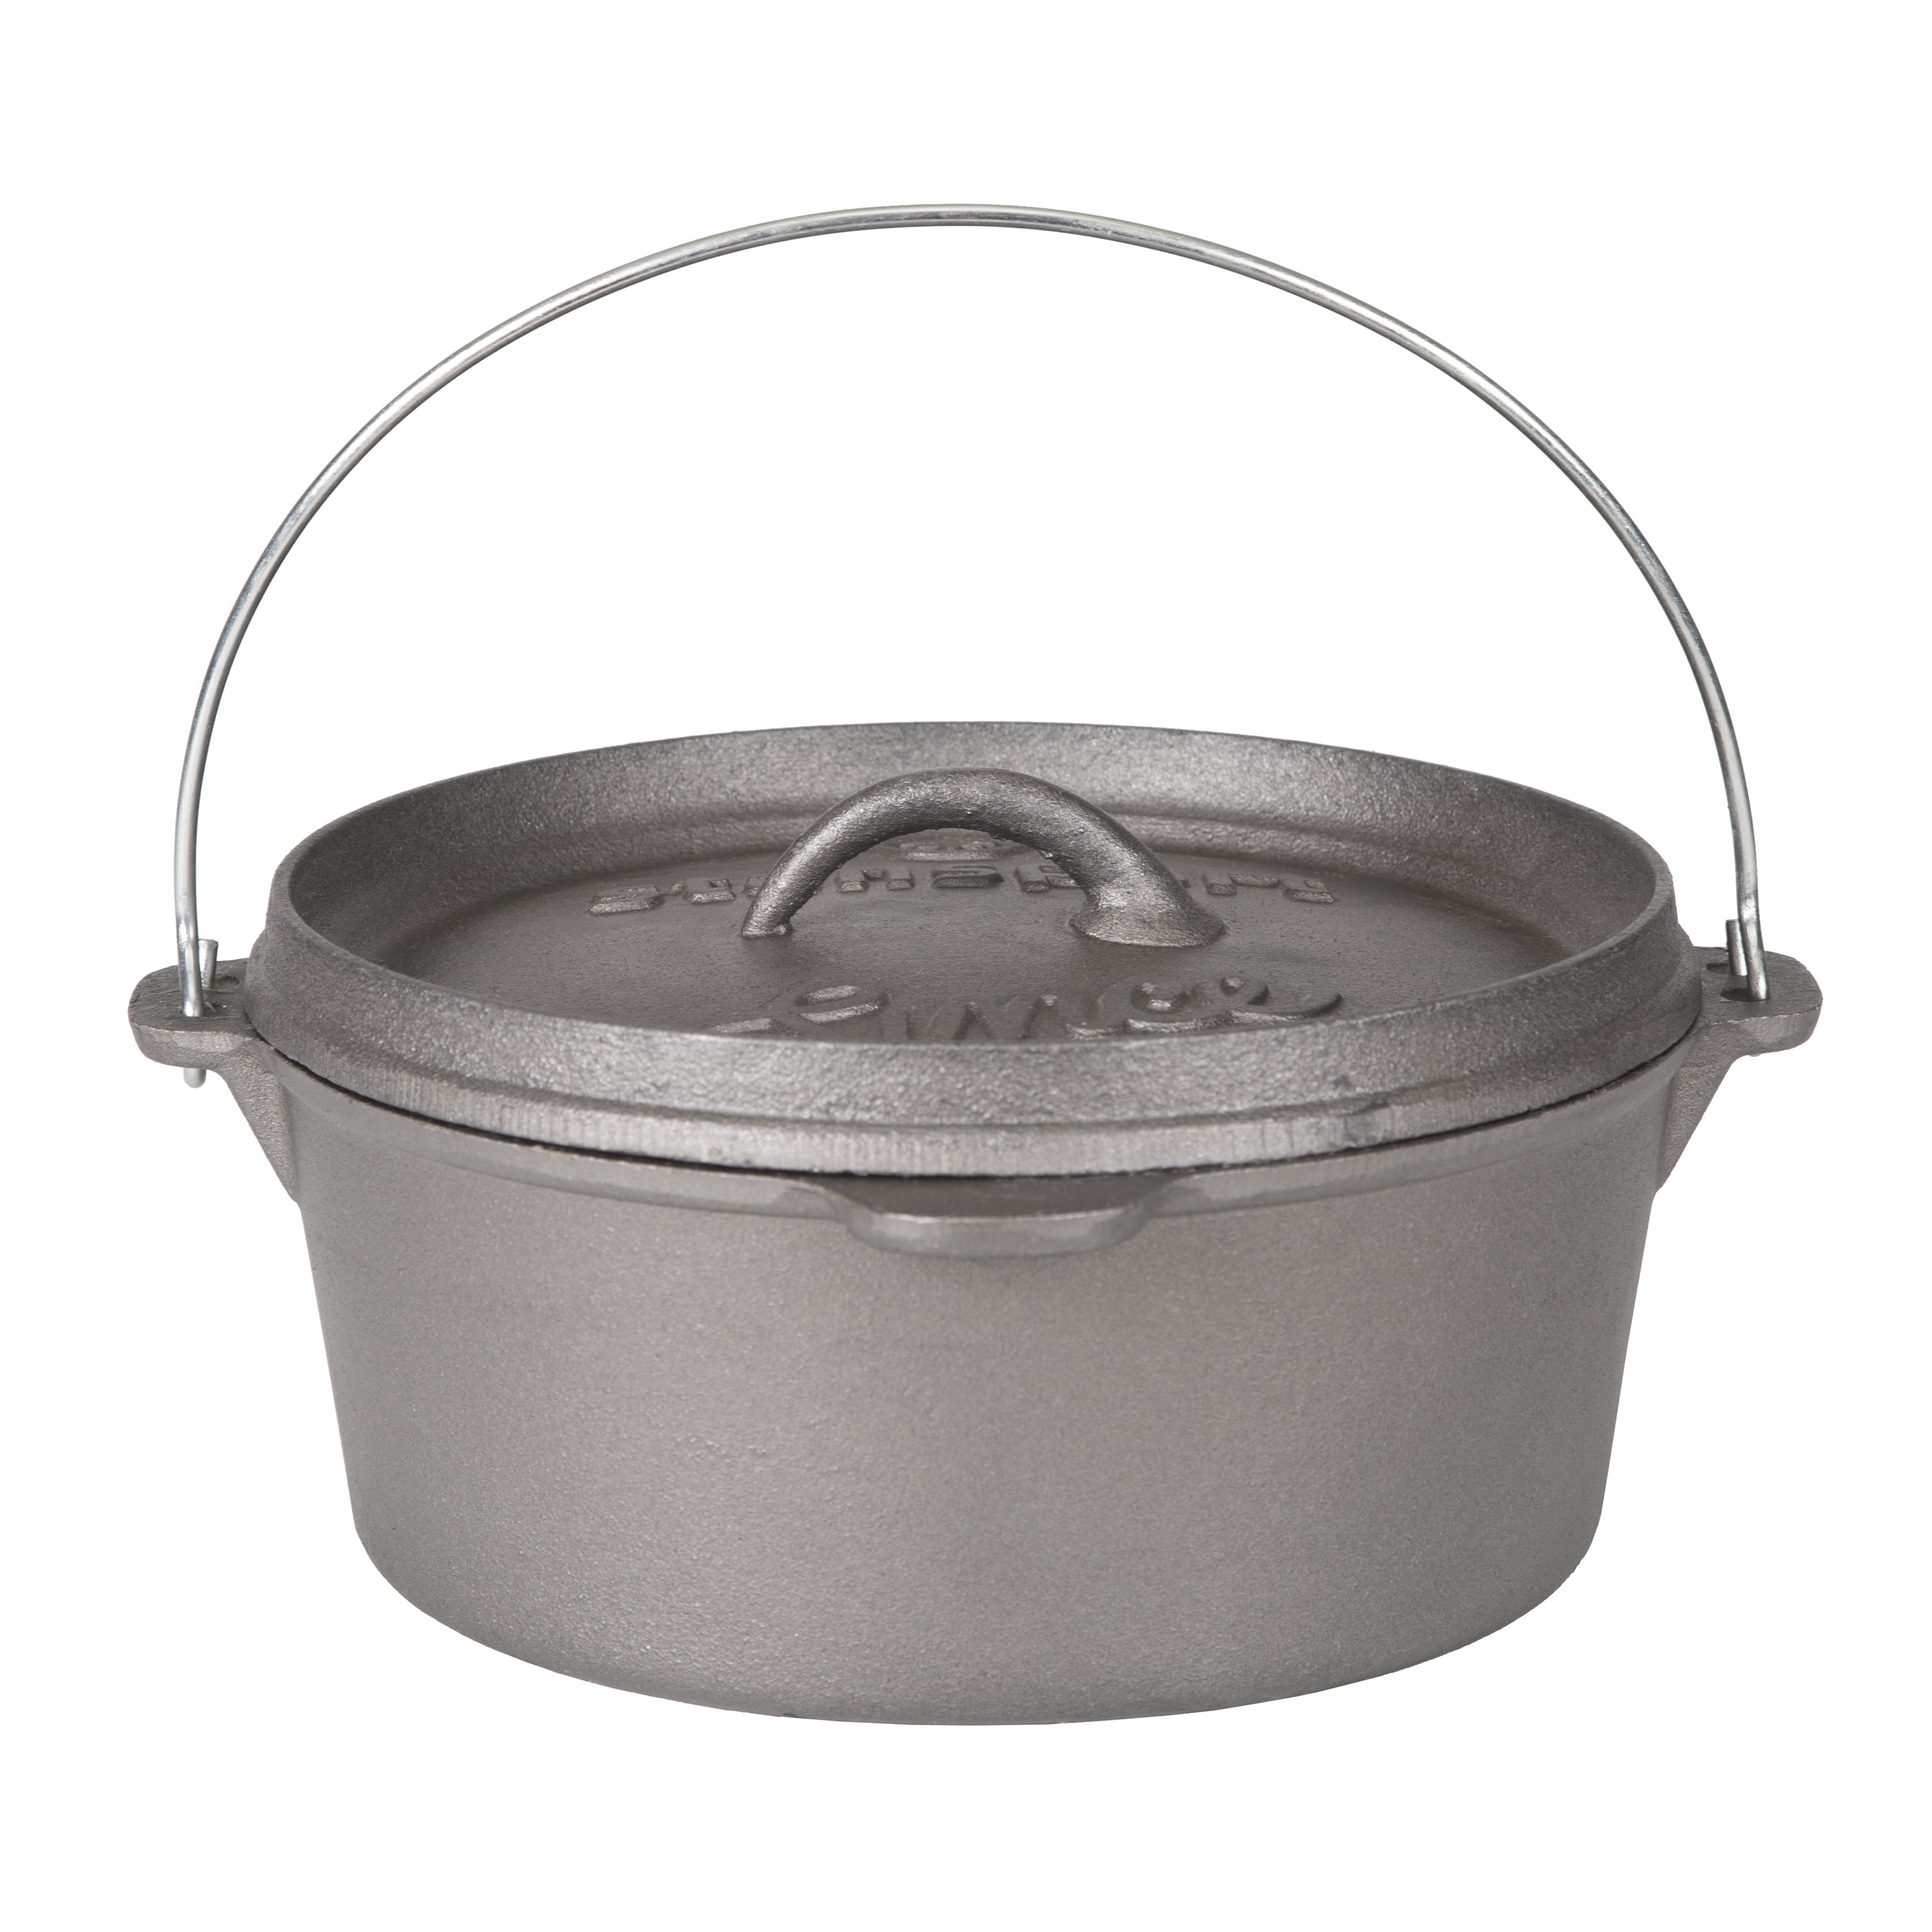  LIFERUN Dutch Oven Pot with Lid, 12 Quart Cast Iron Dutch Oven,  without Feet, with Stand & Spiral-shaped Handle, Cast Iron Pot for Outdoor  & Indoor: Home & Kitchen